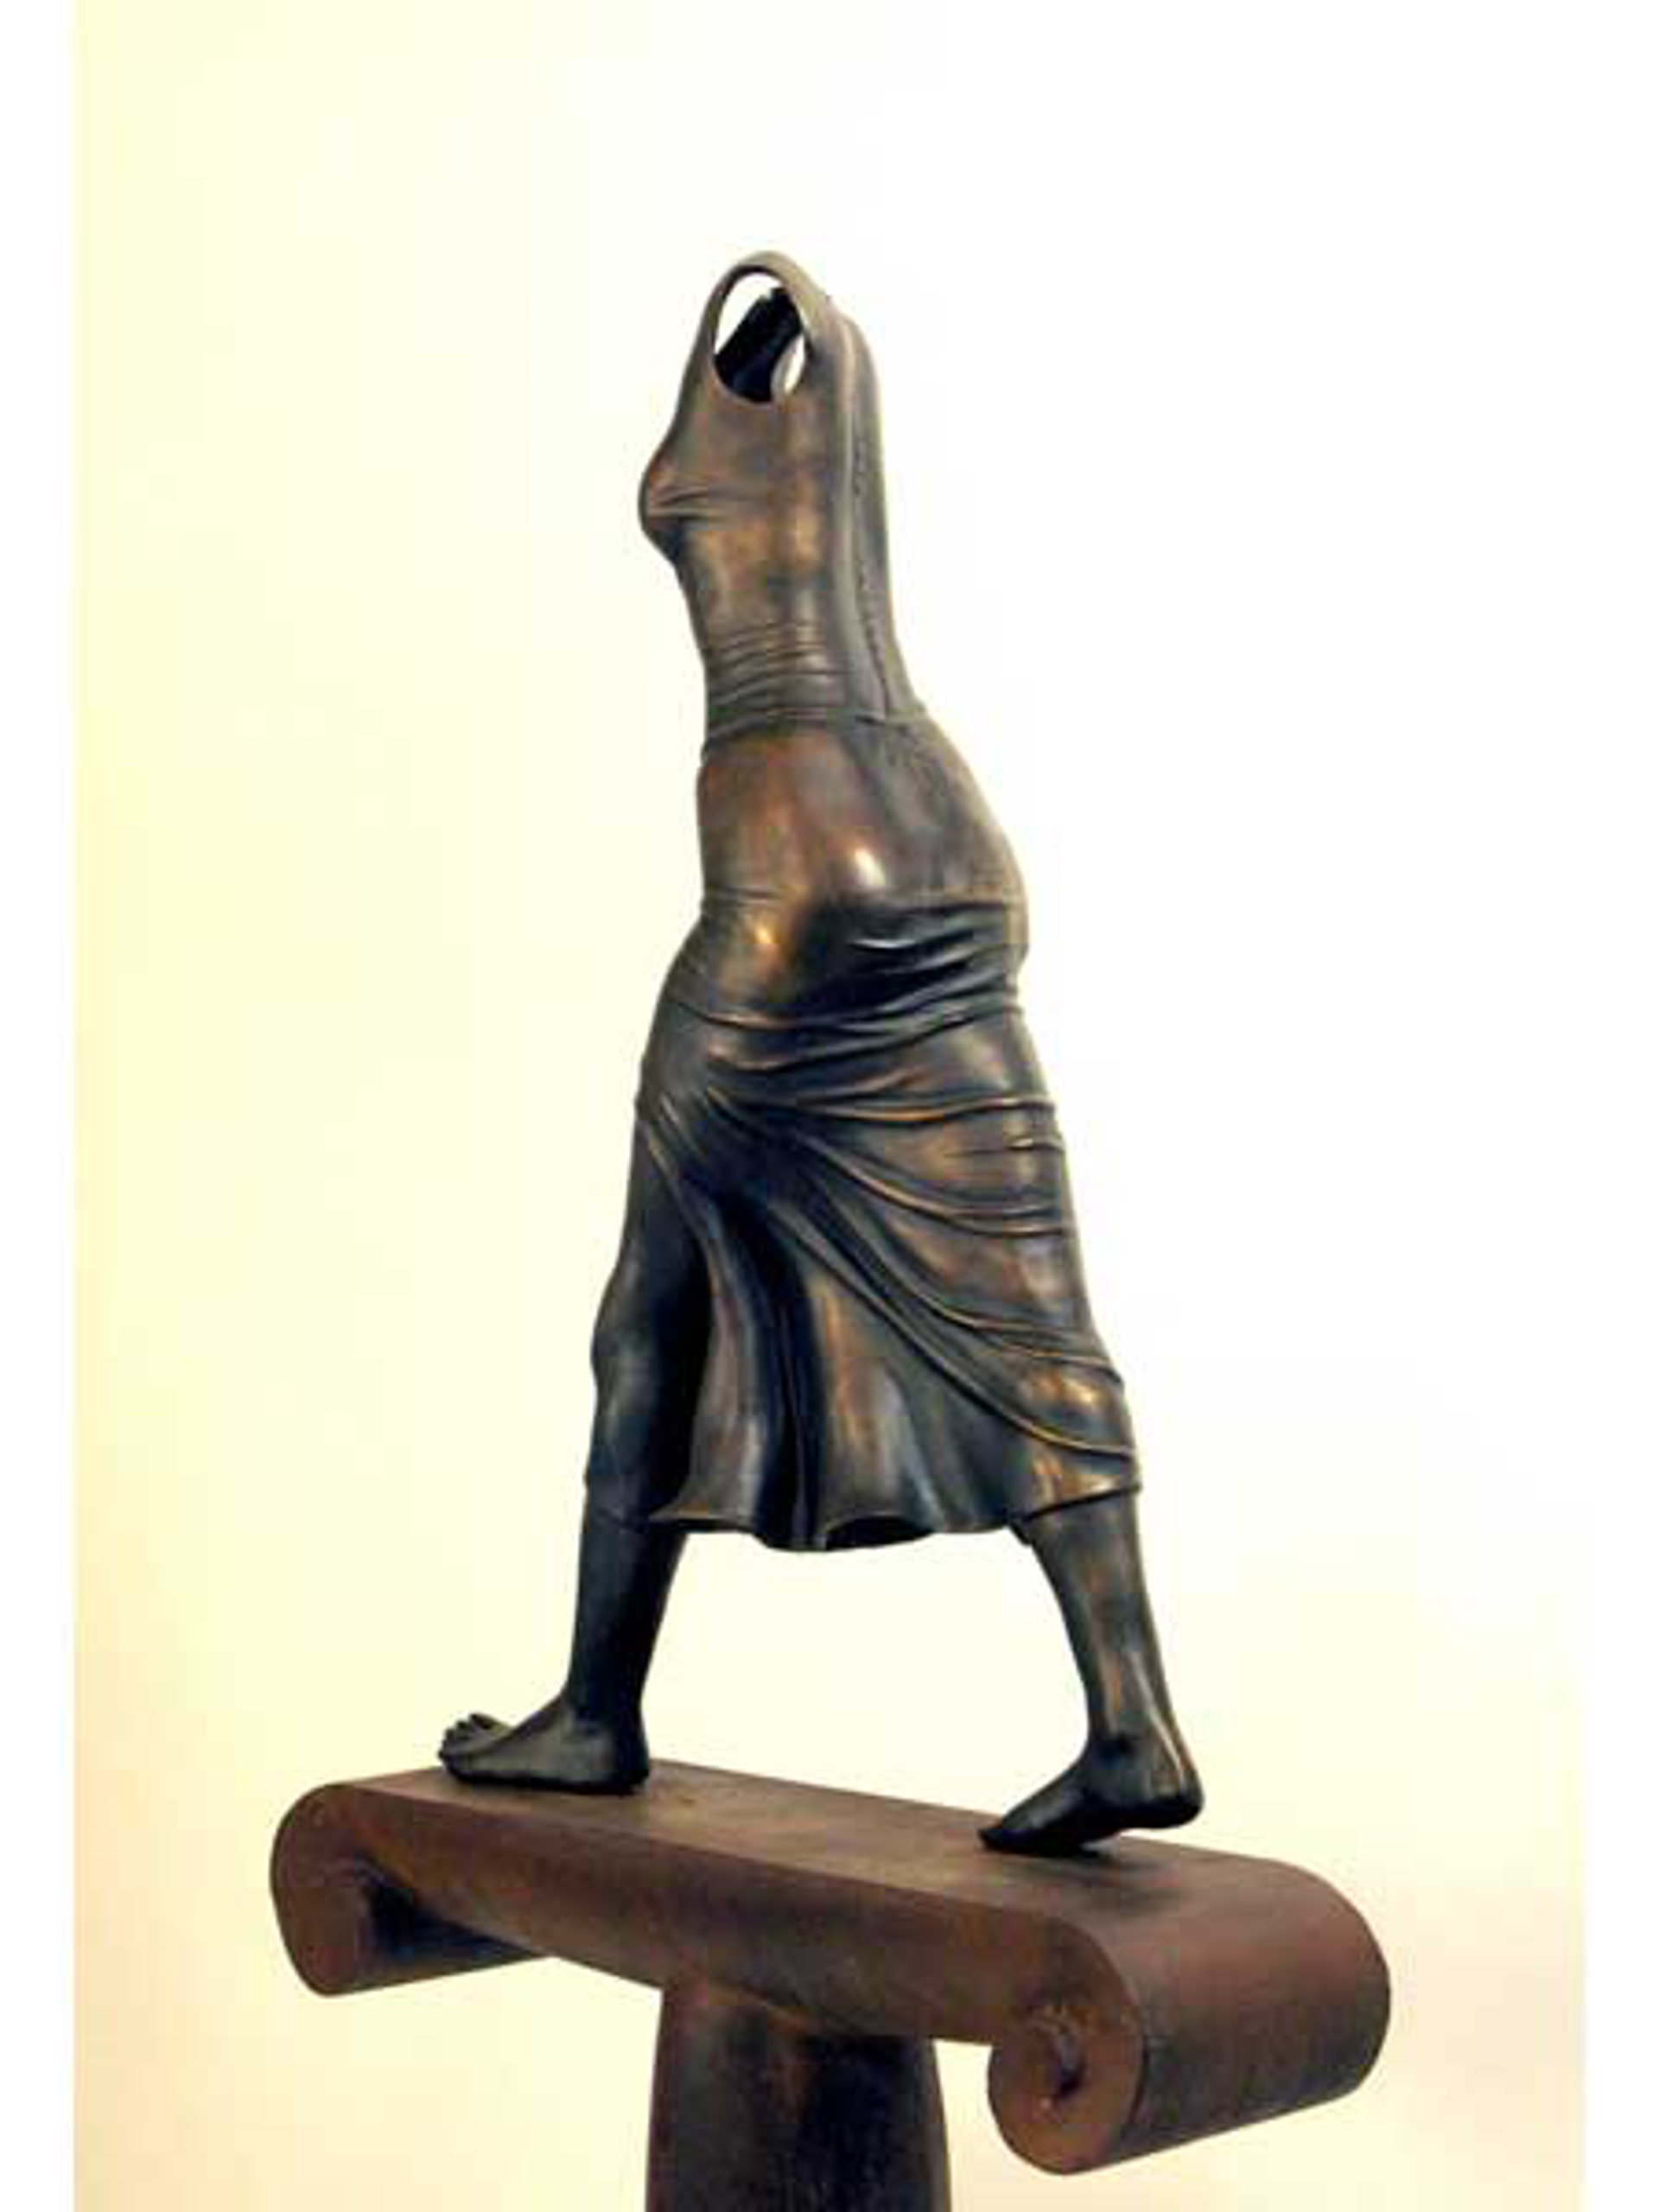 Truckin, bronze edition 12 by Rodger Jacobsen